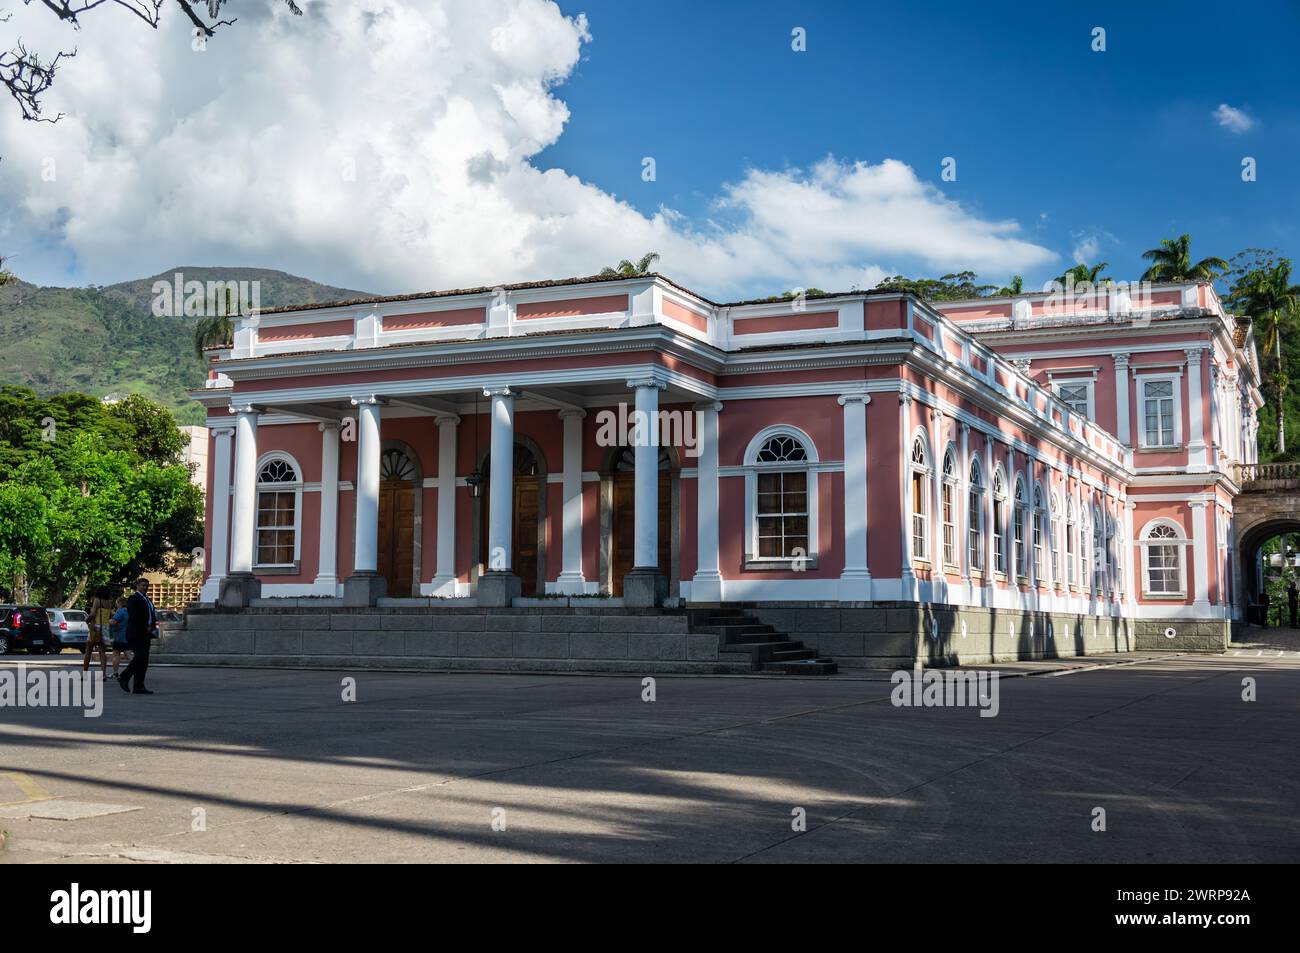 Side view of the Petropolis Imperial Palace, location of Imperial Museum of Brazil in Centro district under summer afternoon sunny clouded blue sky. Stock Photo